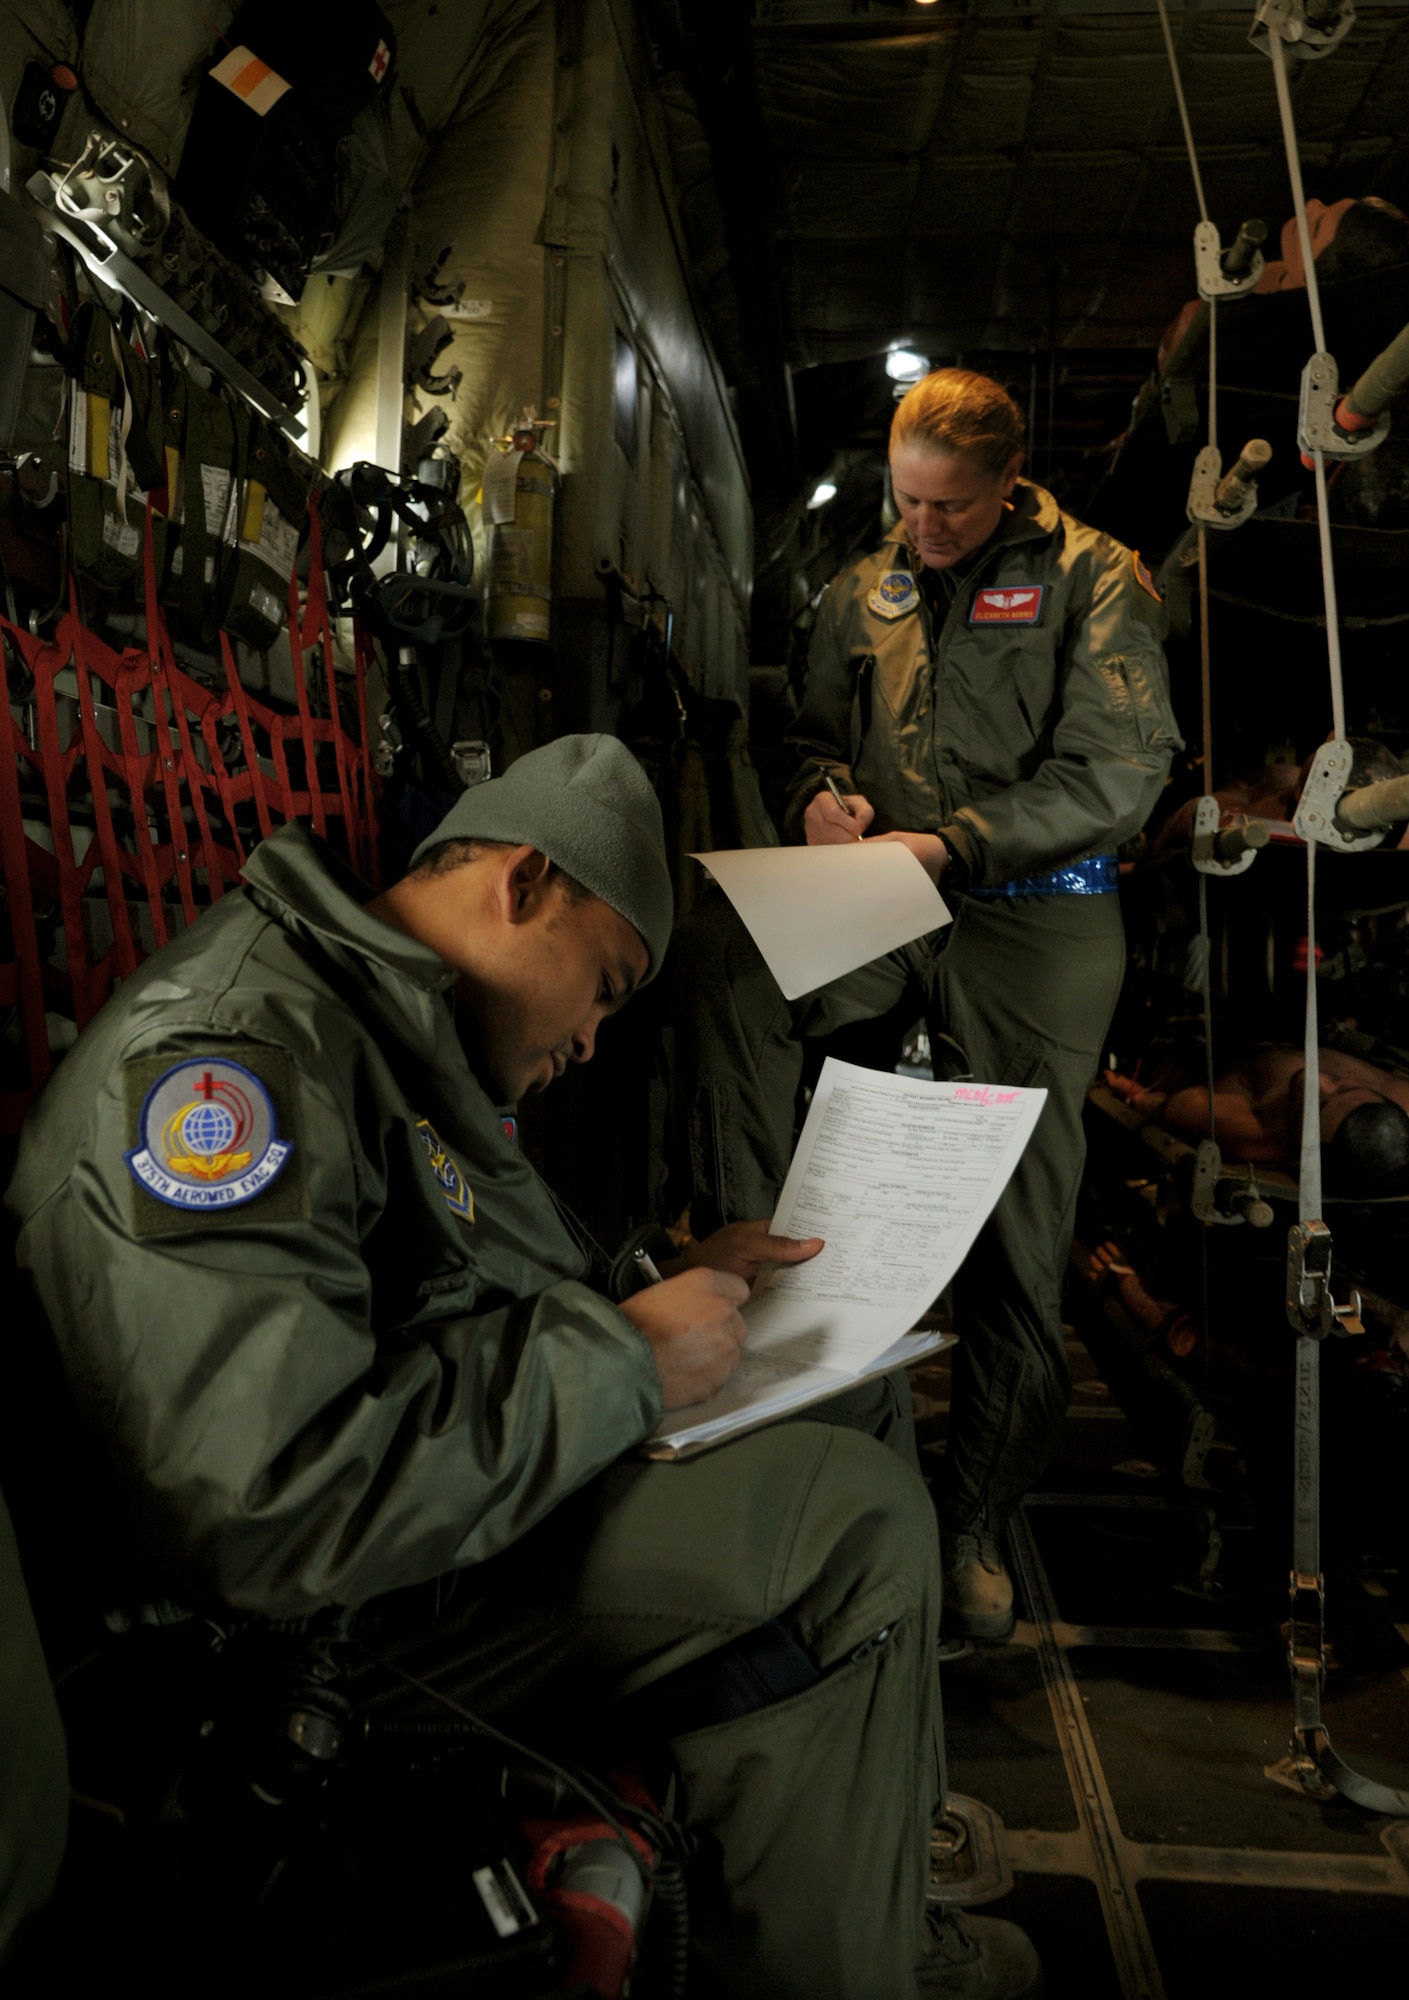 Capt. Elizabeth Norris, flight nurse and Staff Sgt. Sean McCurbin, aeromedical technician, document simulated patient treatment in the air during a national disaster exercise, Ultimate Caduceus 2014, at Cheyenne Air National Guard Base, Wyo., March 31, 2014. During Ultimate Caduceus, part of the Federal Emergency Management Agency’s National Capstone Exercise, AE members provided medical support, processed and transferred patients. The aeromedical teams were comprised of more than 18 AE crew members from Pope Army Airfield, N.C., Scott AFB, Ill., and Cheyenne ANG base, Wyo. (U.S. Air Force photo/ Staff Sgt. Stephenie Wade)